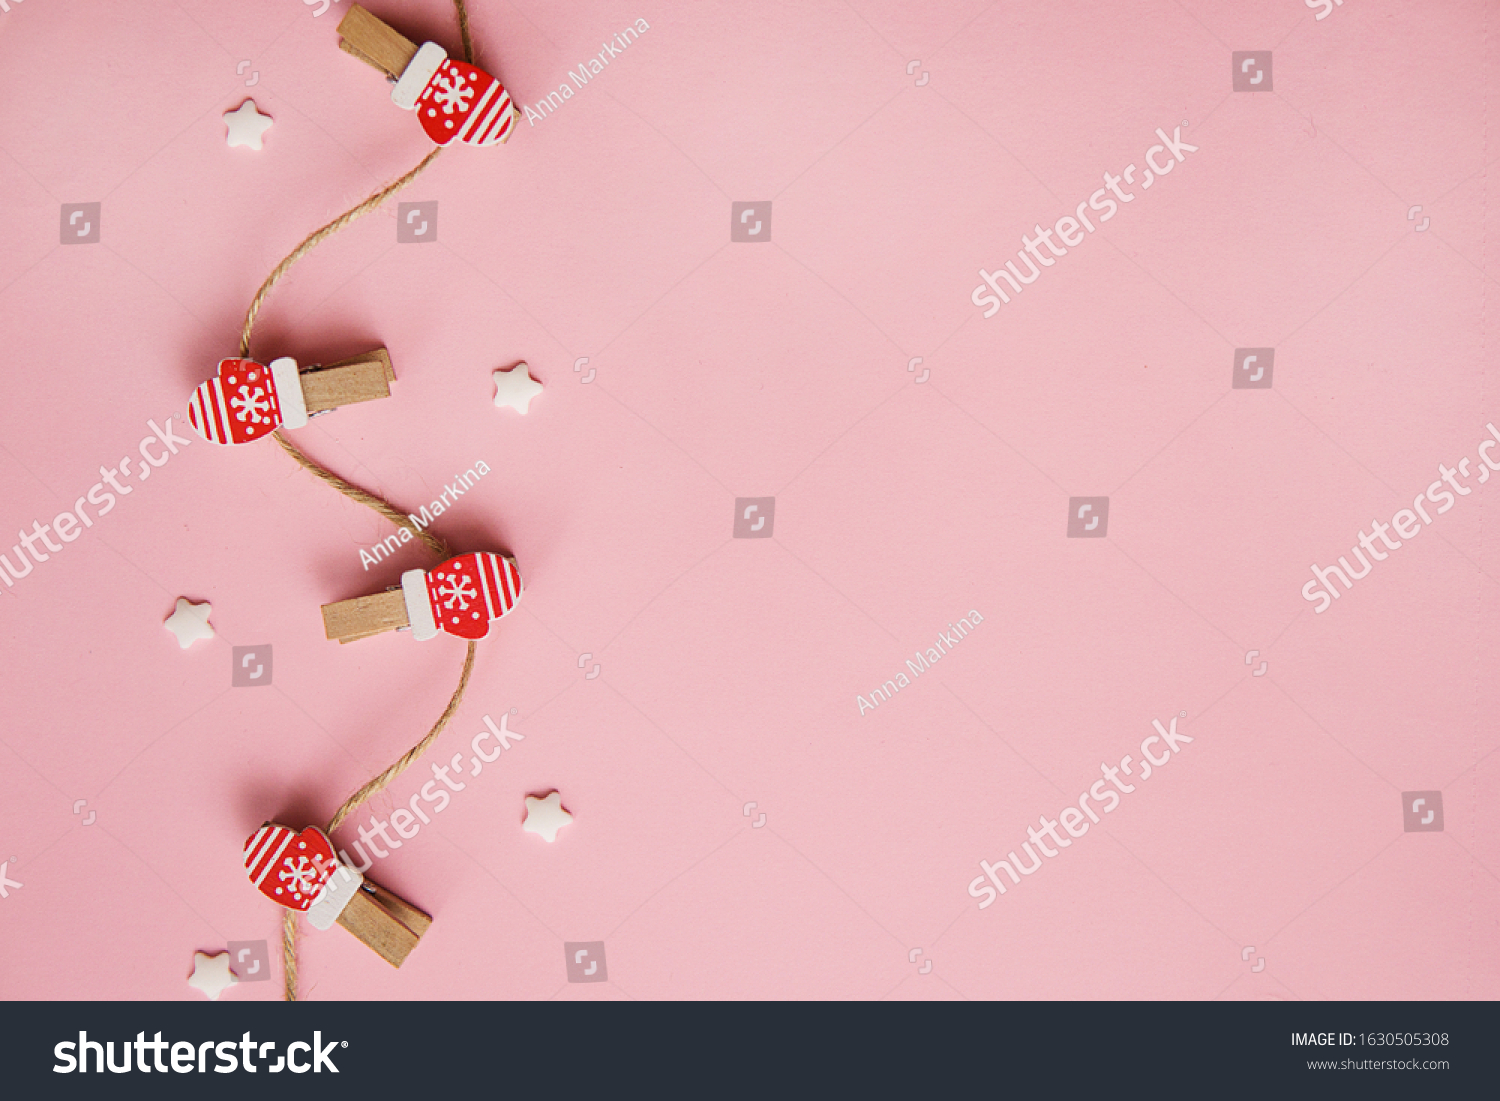 Christmas decorations decorative background. Decorative pins in the form of red gloves on a pink background. Top view, minimalism, flat lay. #1630505308